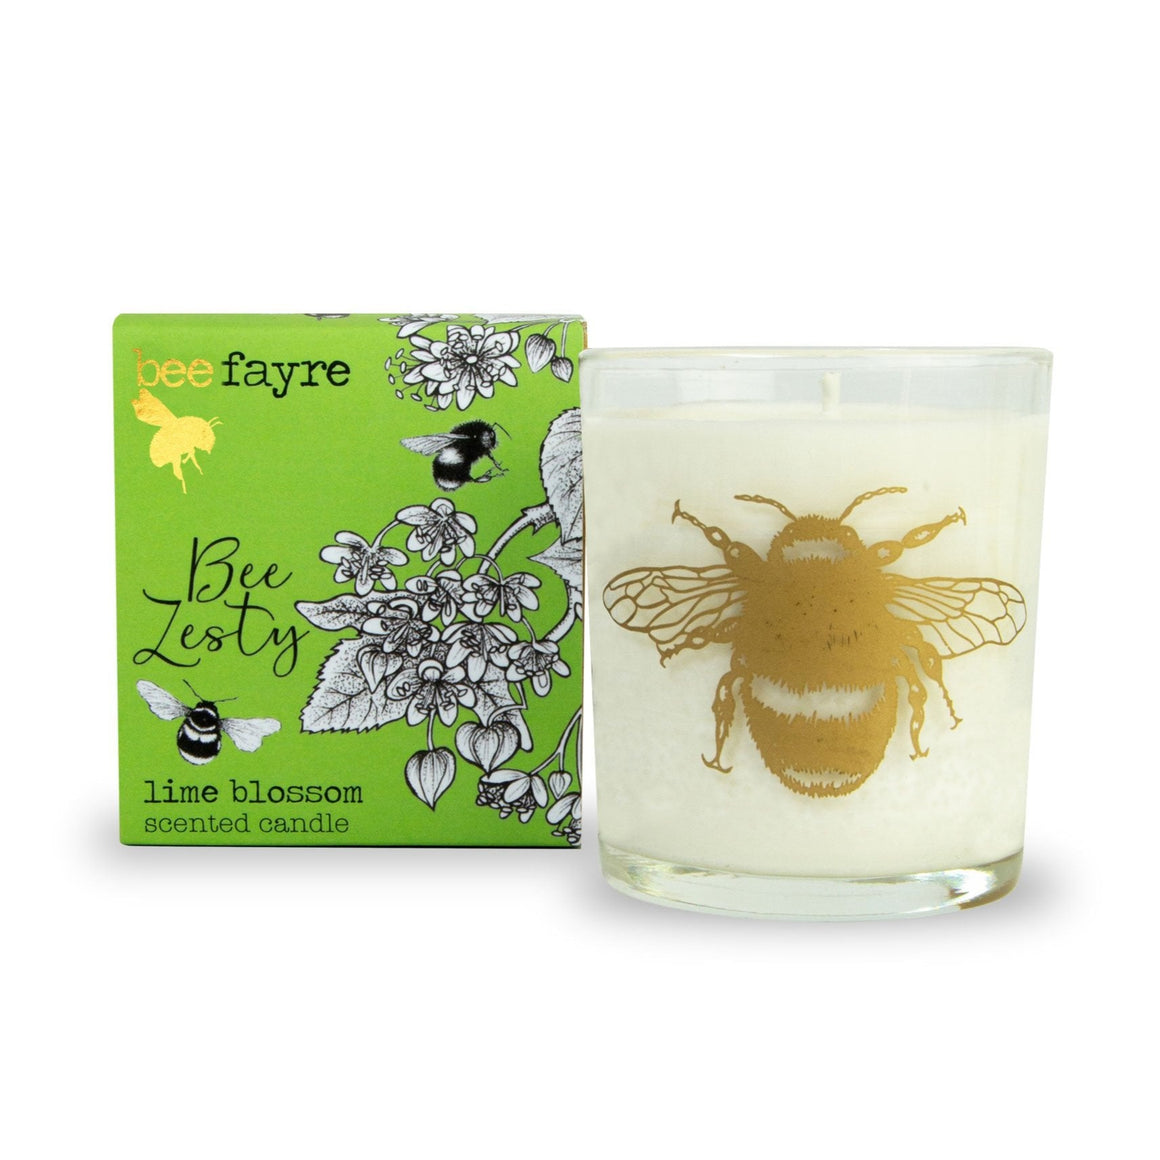 Bee Fayre Bee Zesty Lime Blossom Large Scented Candle